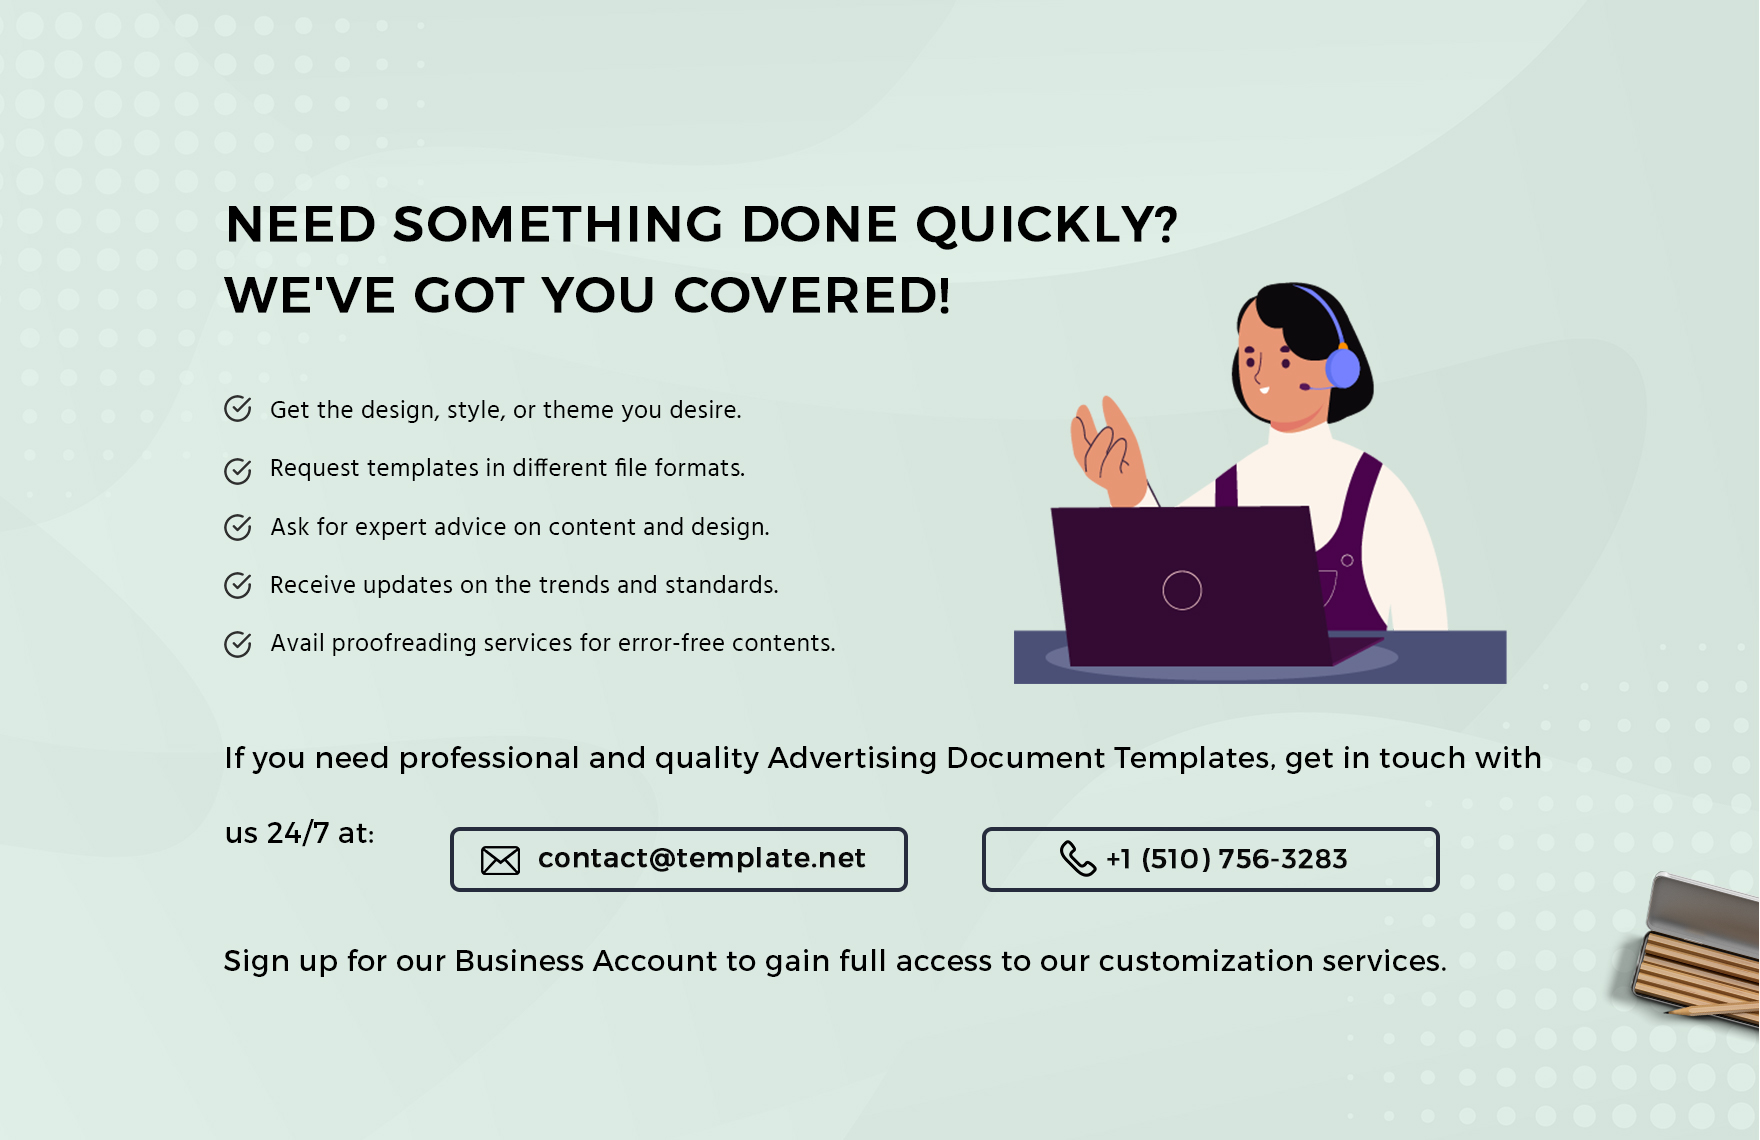 Advertising Compliance Document Template